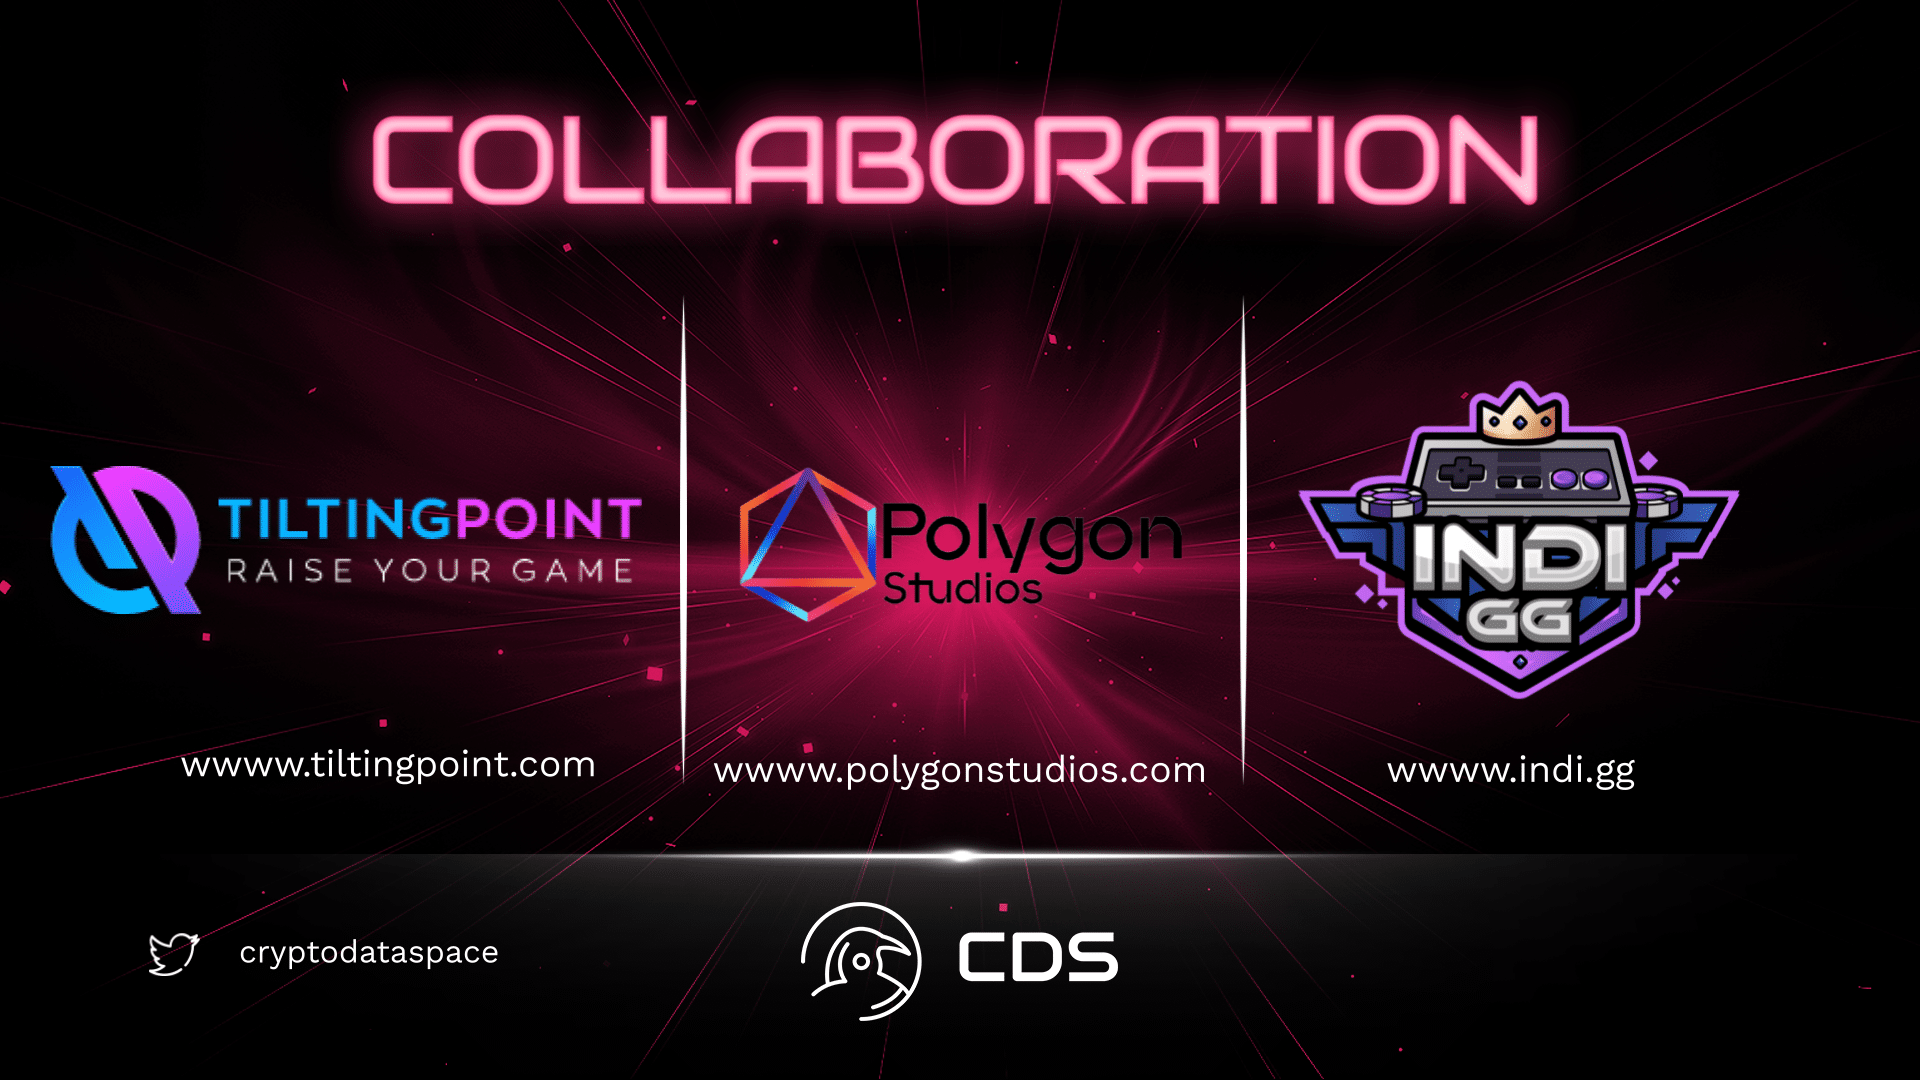 For Web3 Games, IndiGG Announces a Partnership with Tilting Point and Polygon